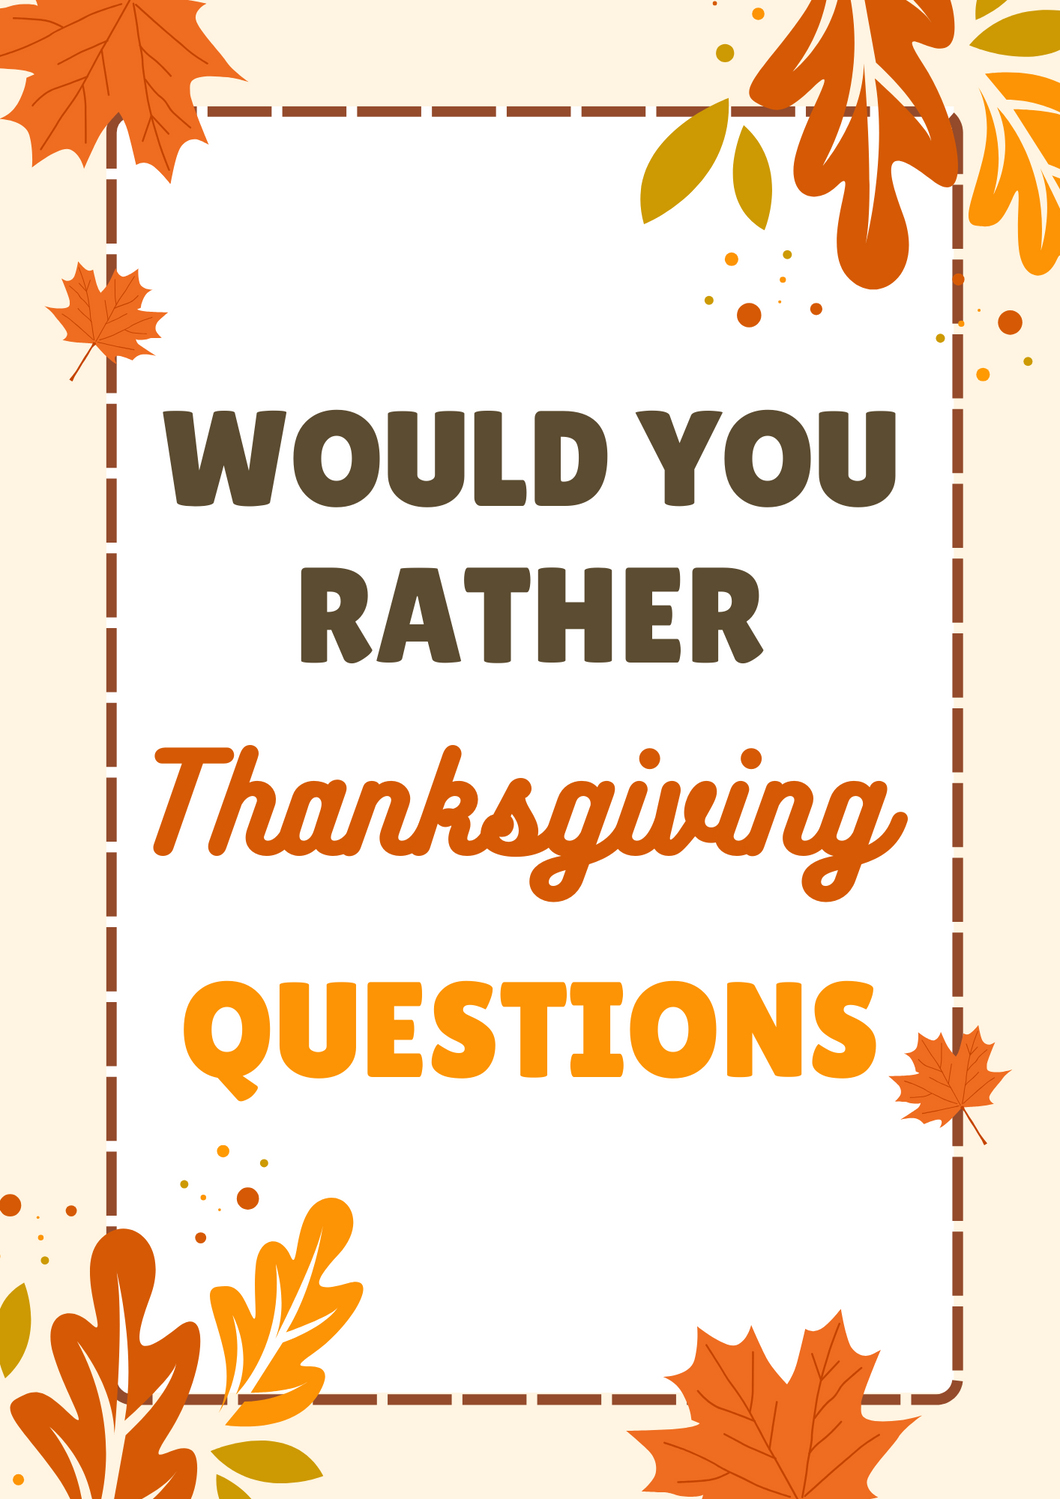 Looking for some Thanksgiving-themed VIP Vault Would You Rather questions? Check out our printable collection for a fun twist on the holiday conversation!